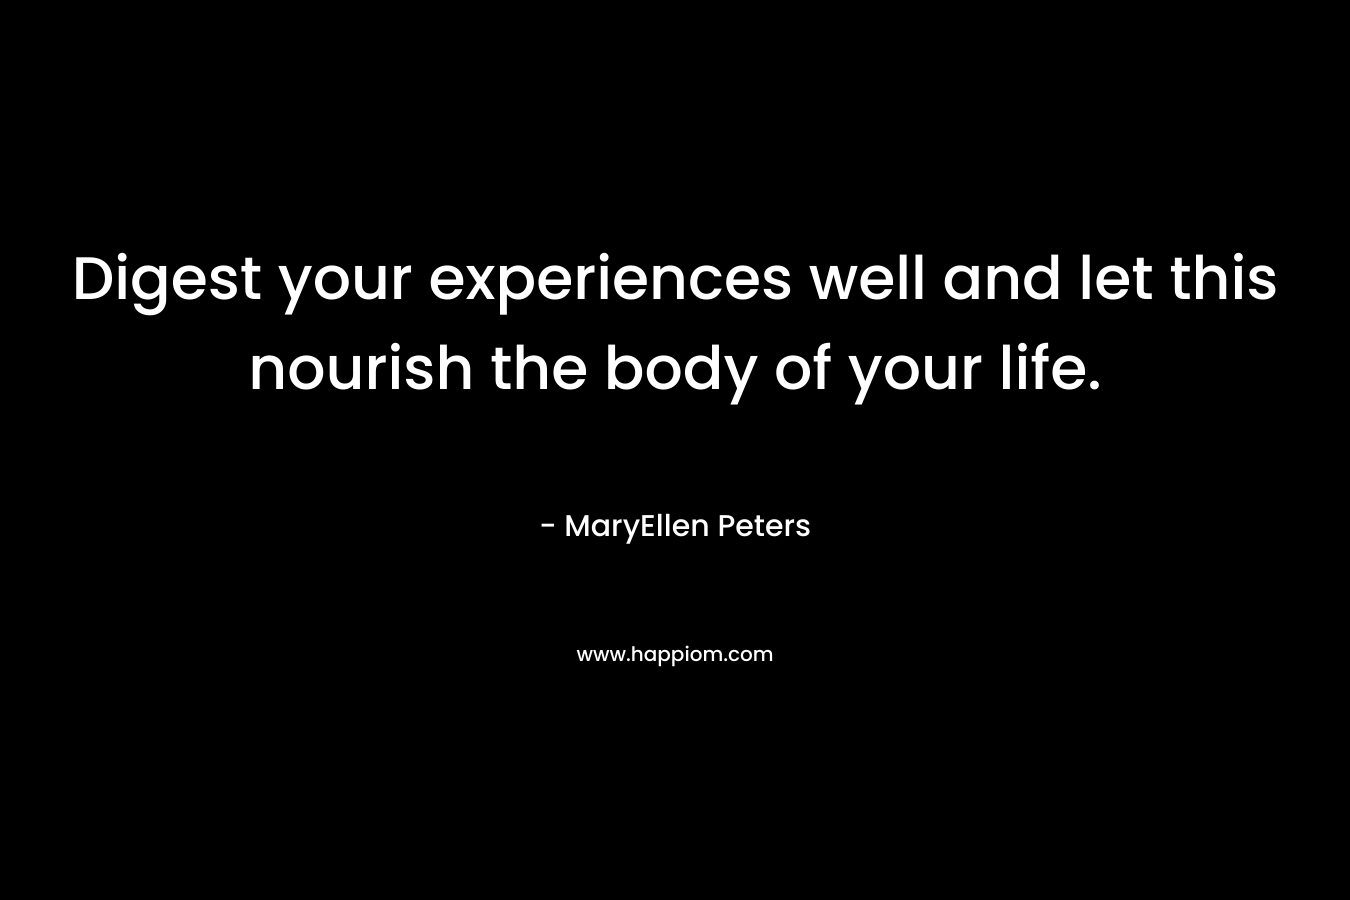 Digest your experiences well and let this nourish the body of your life. – MaryEllen Peters